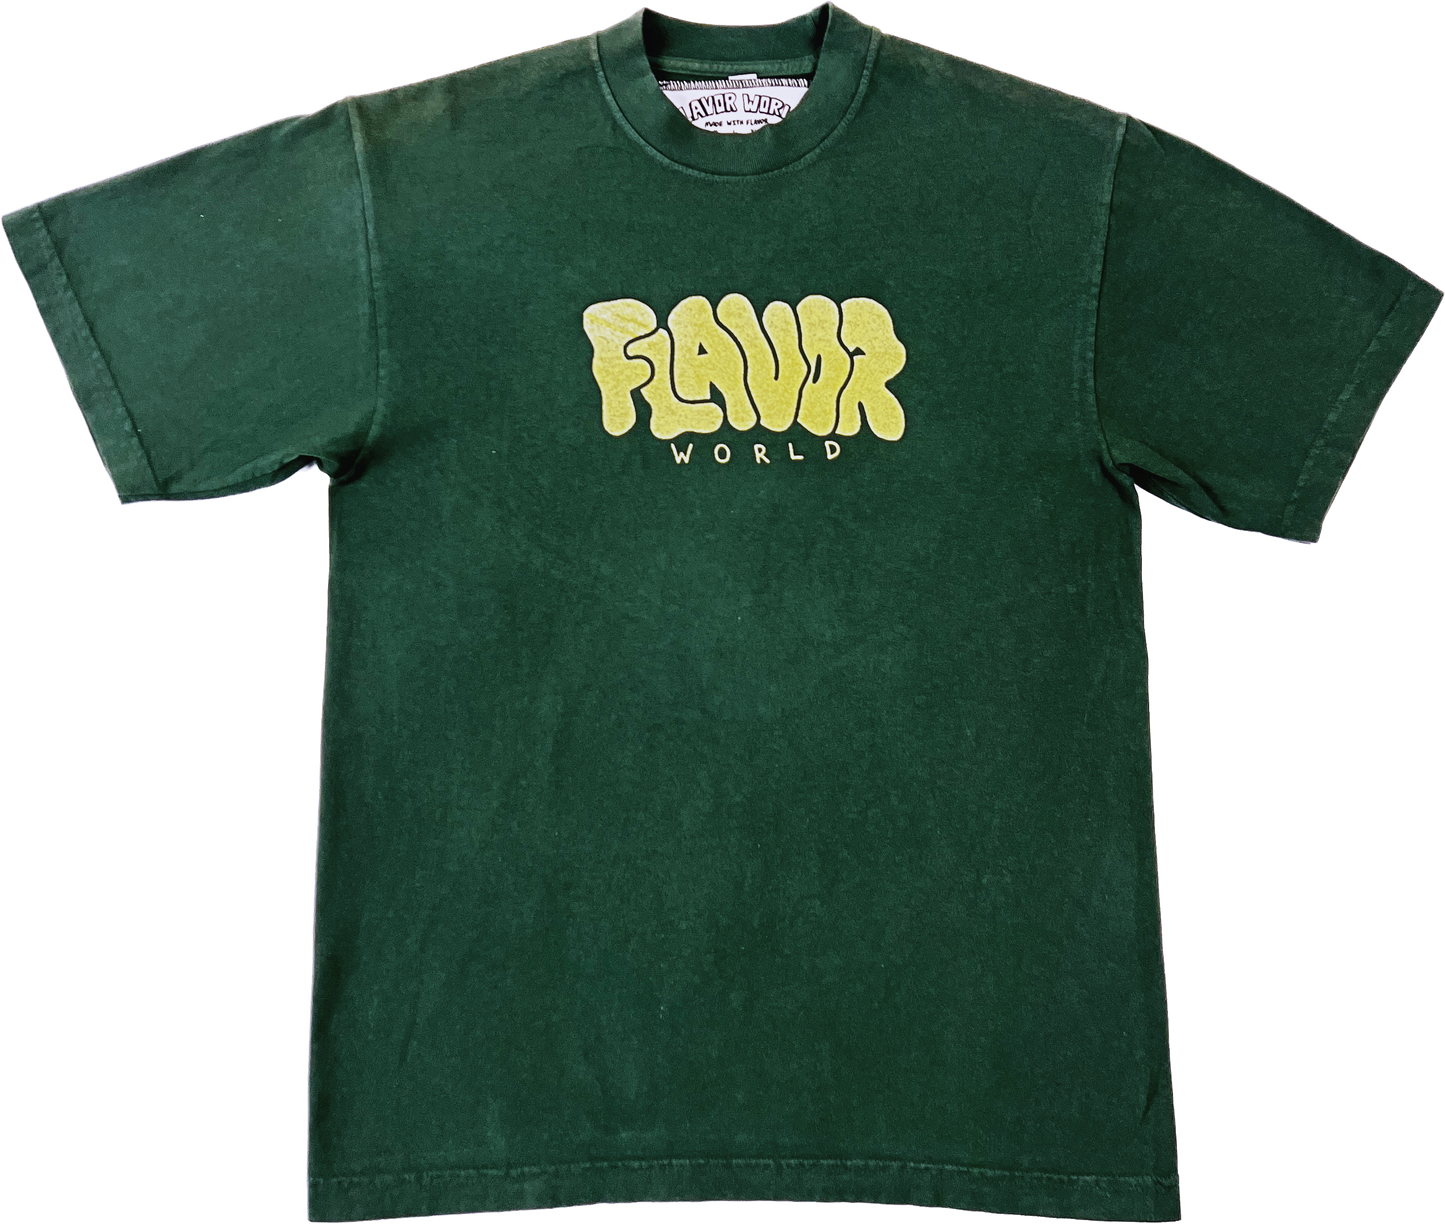 Green & Gold T